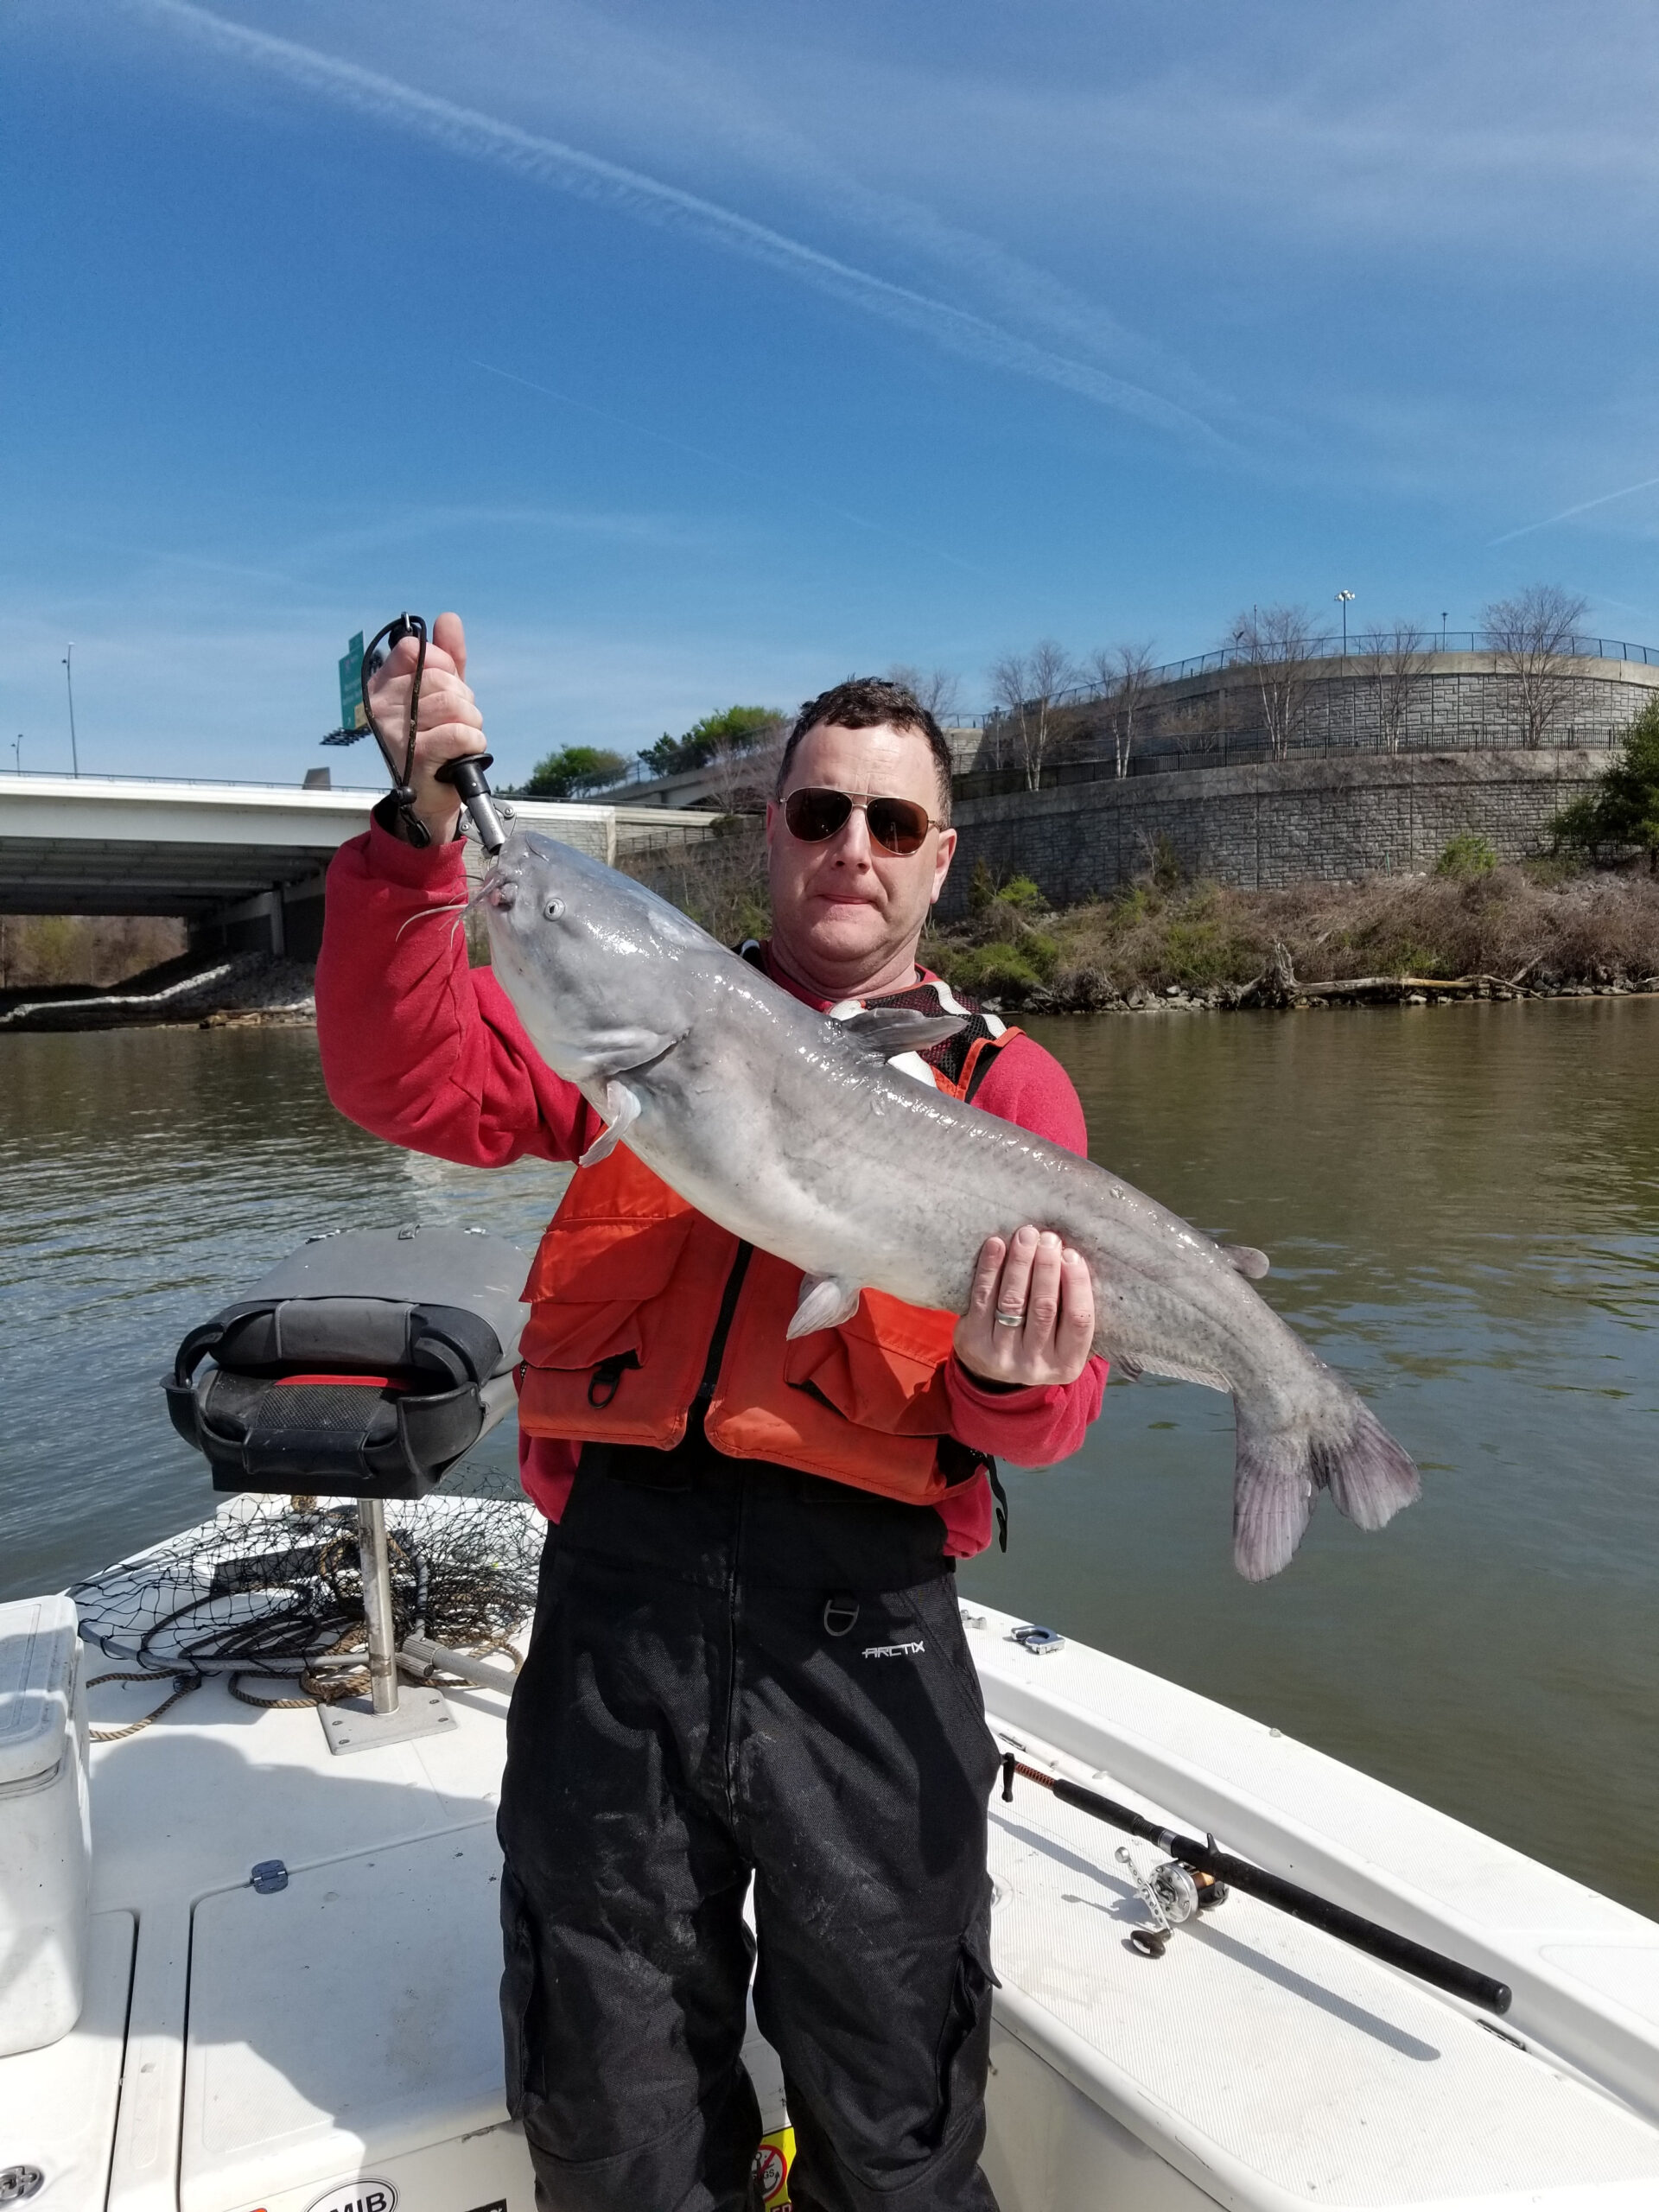 https://indianheadcharters.com/wp-content/uploads/2020/03/3-22-20-1-scaled.jpg